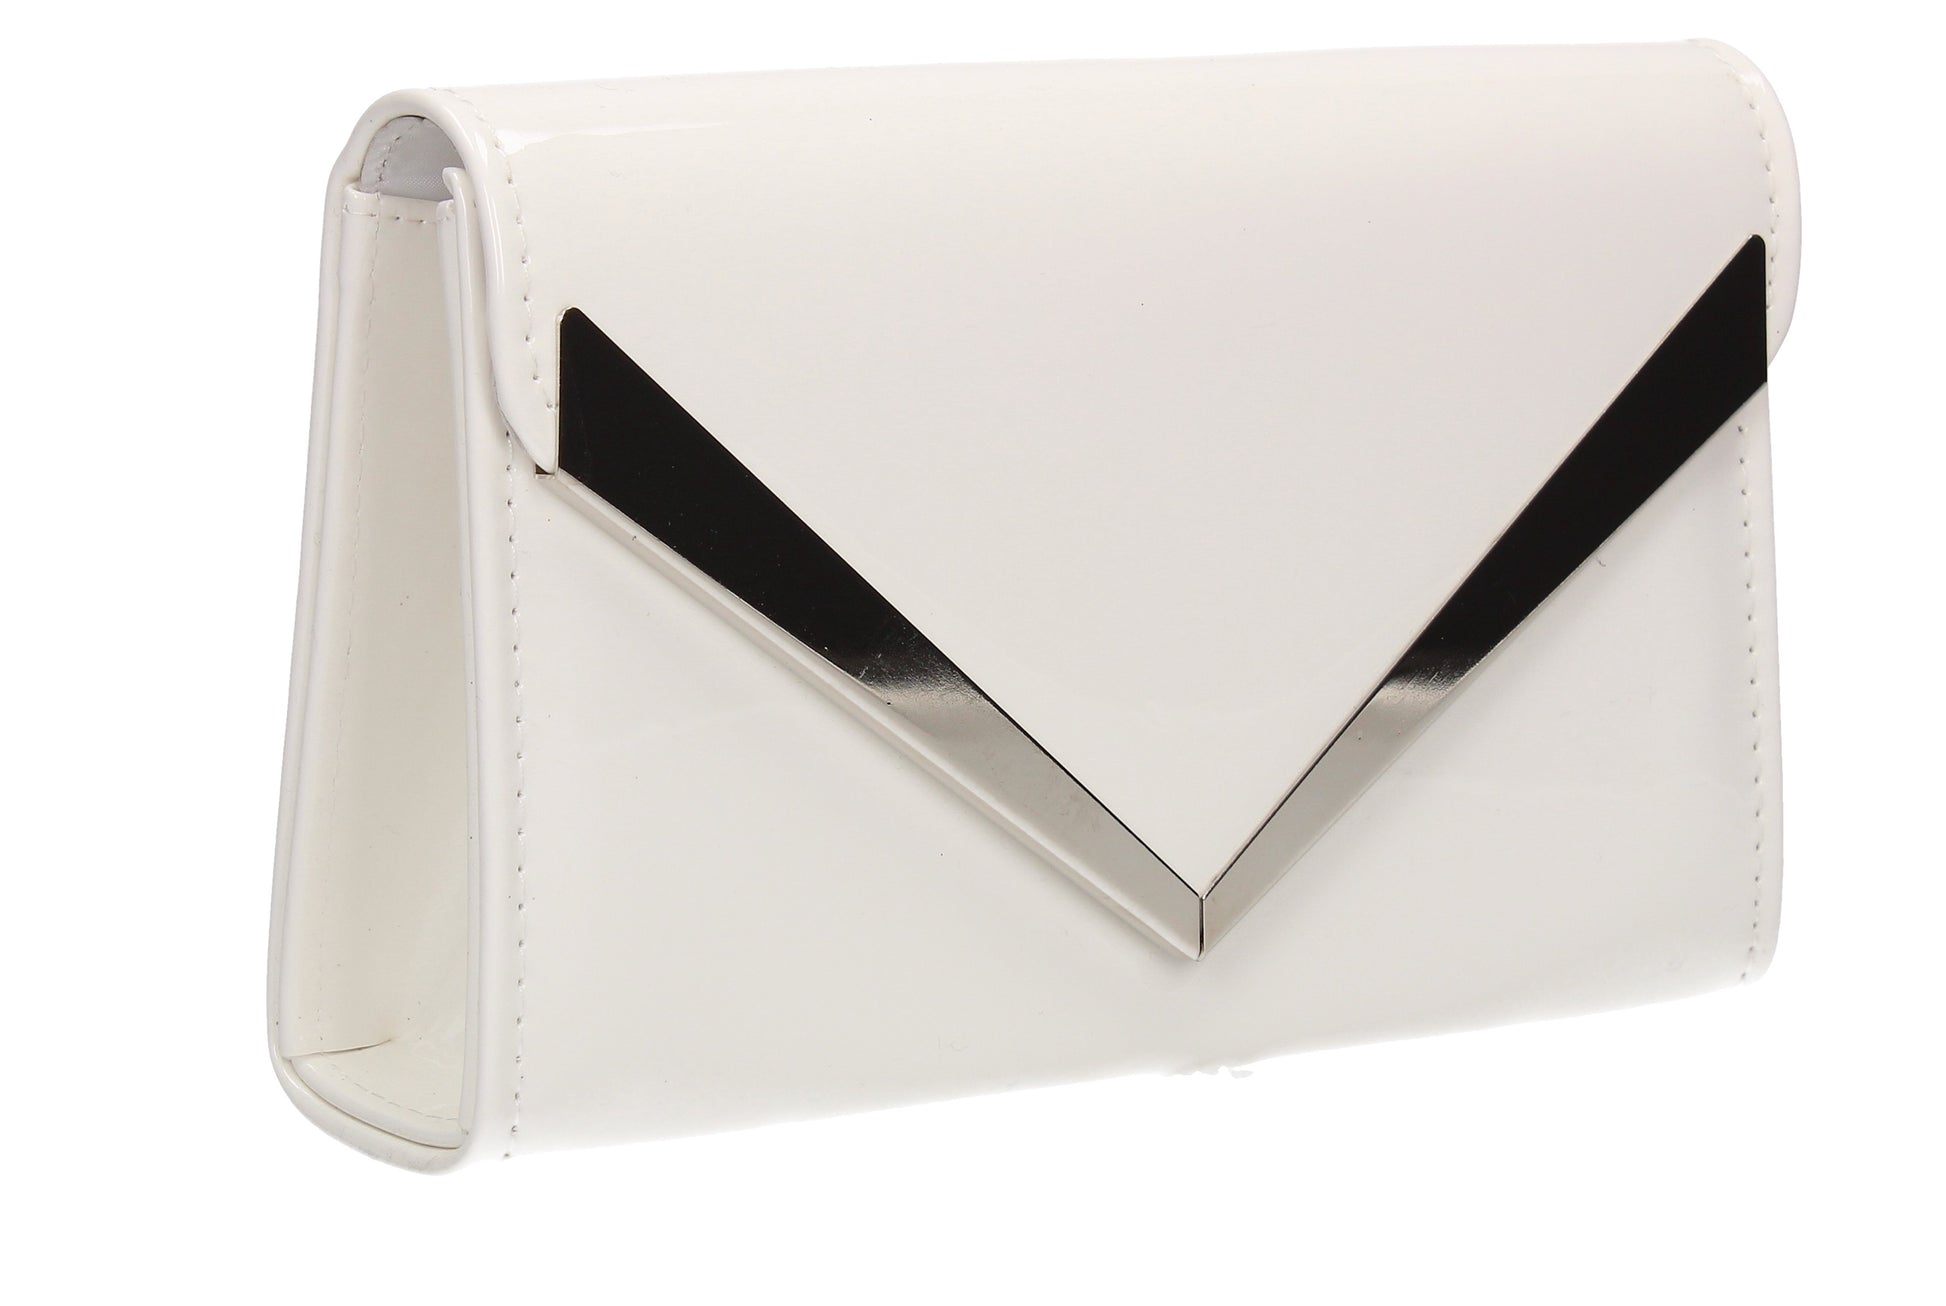 SWANKYSWANS Wendy V Patent Clutch Bag White Cute Cheap Clutch Bag For Weddings School and Work